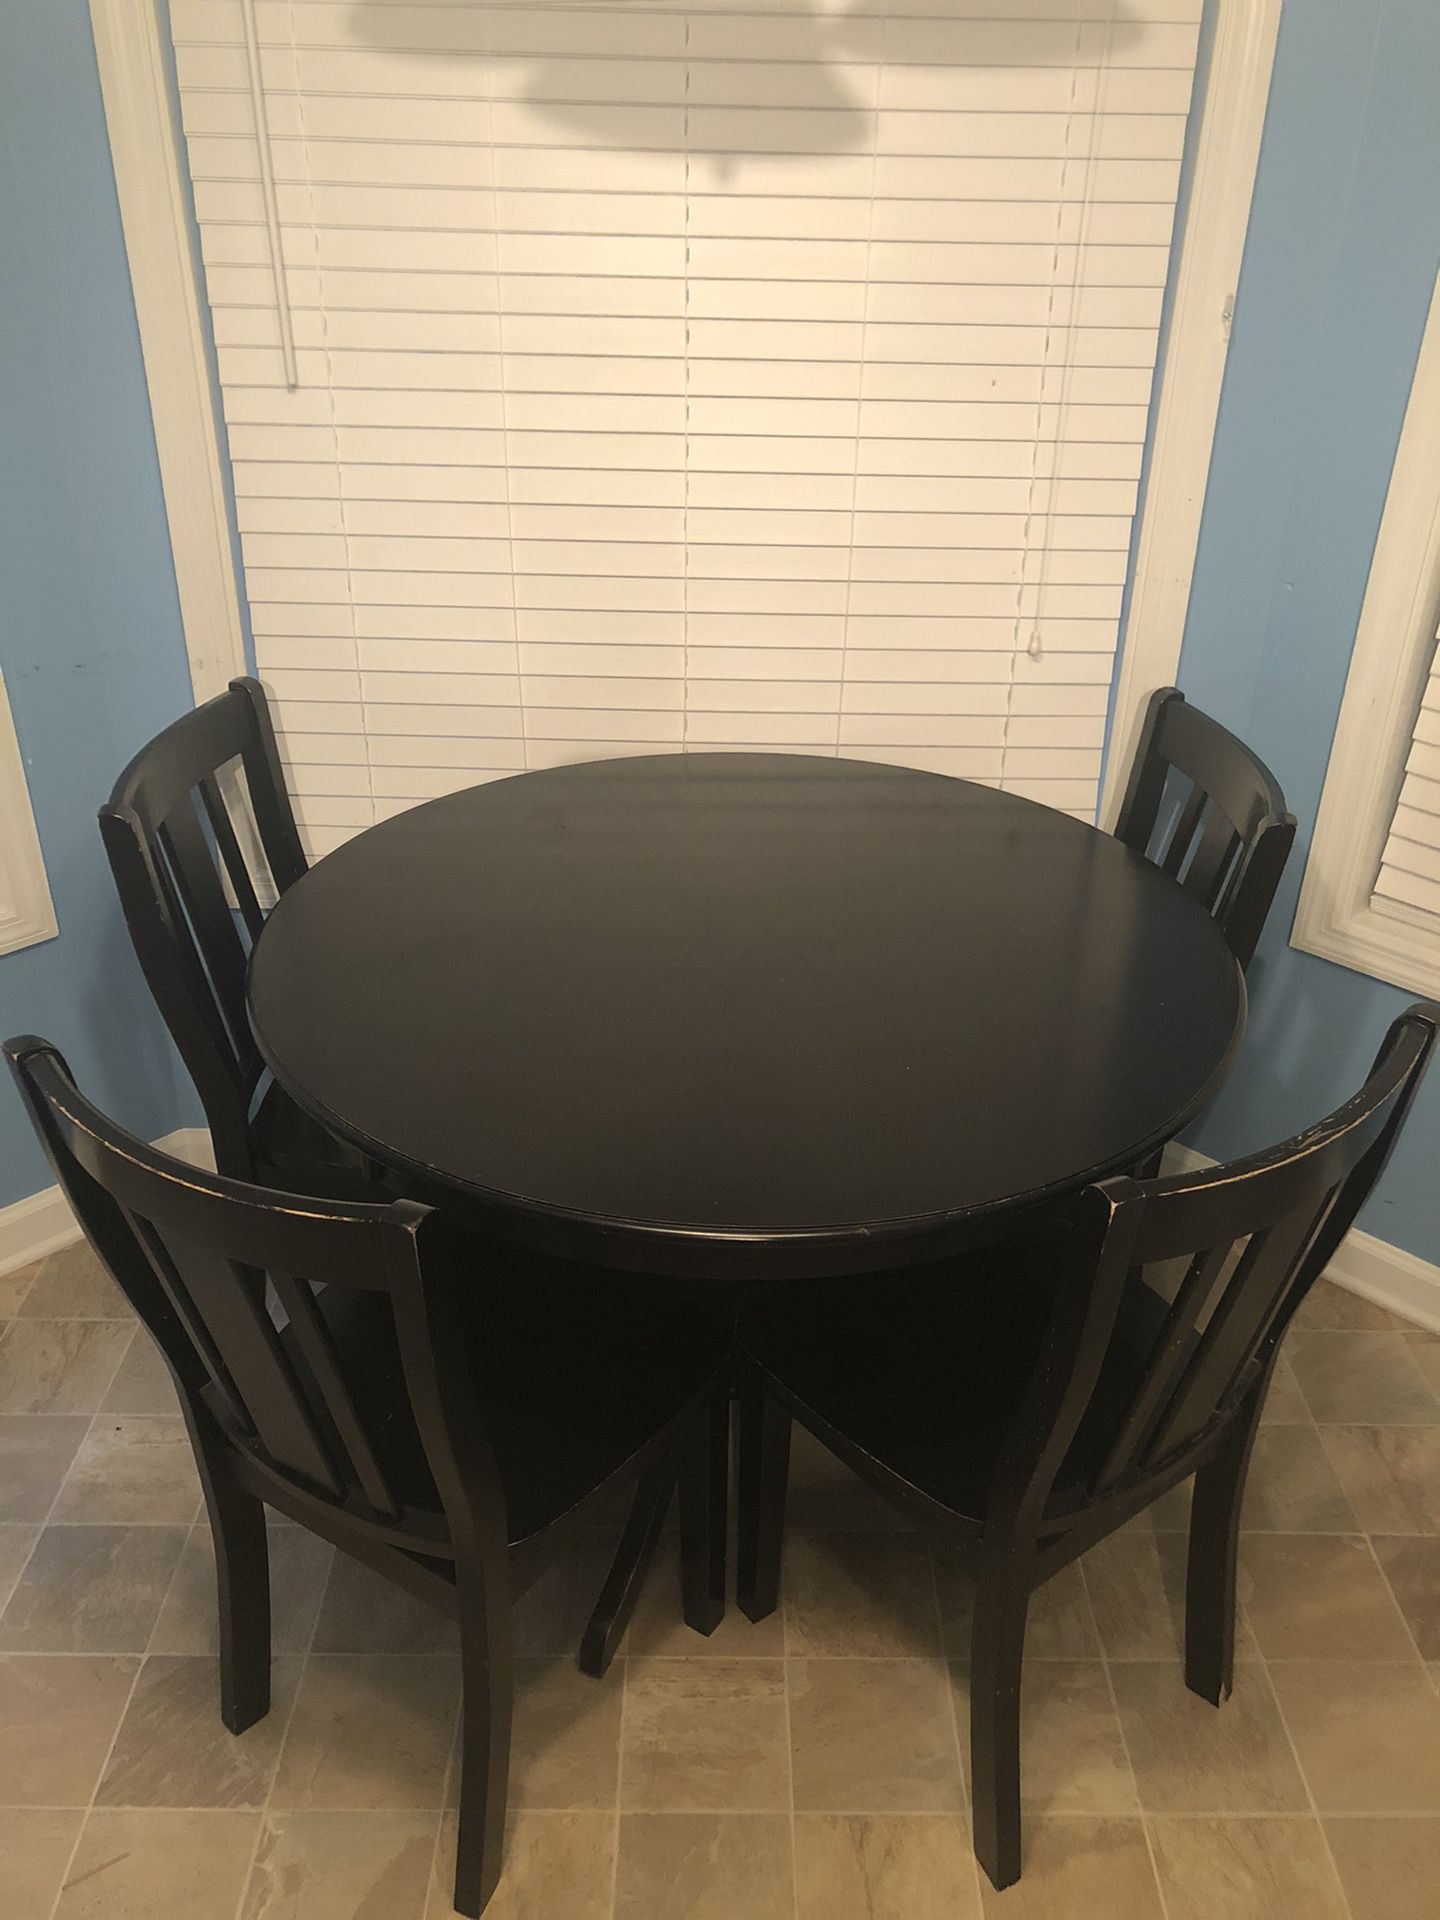 Round dining table with four chairs (free) ($0.00)